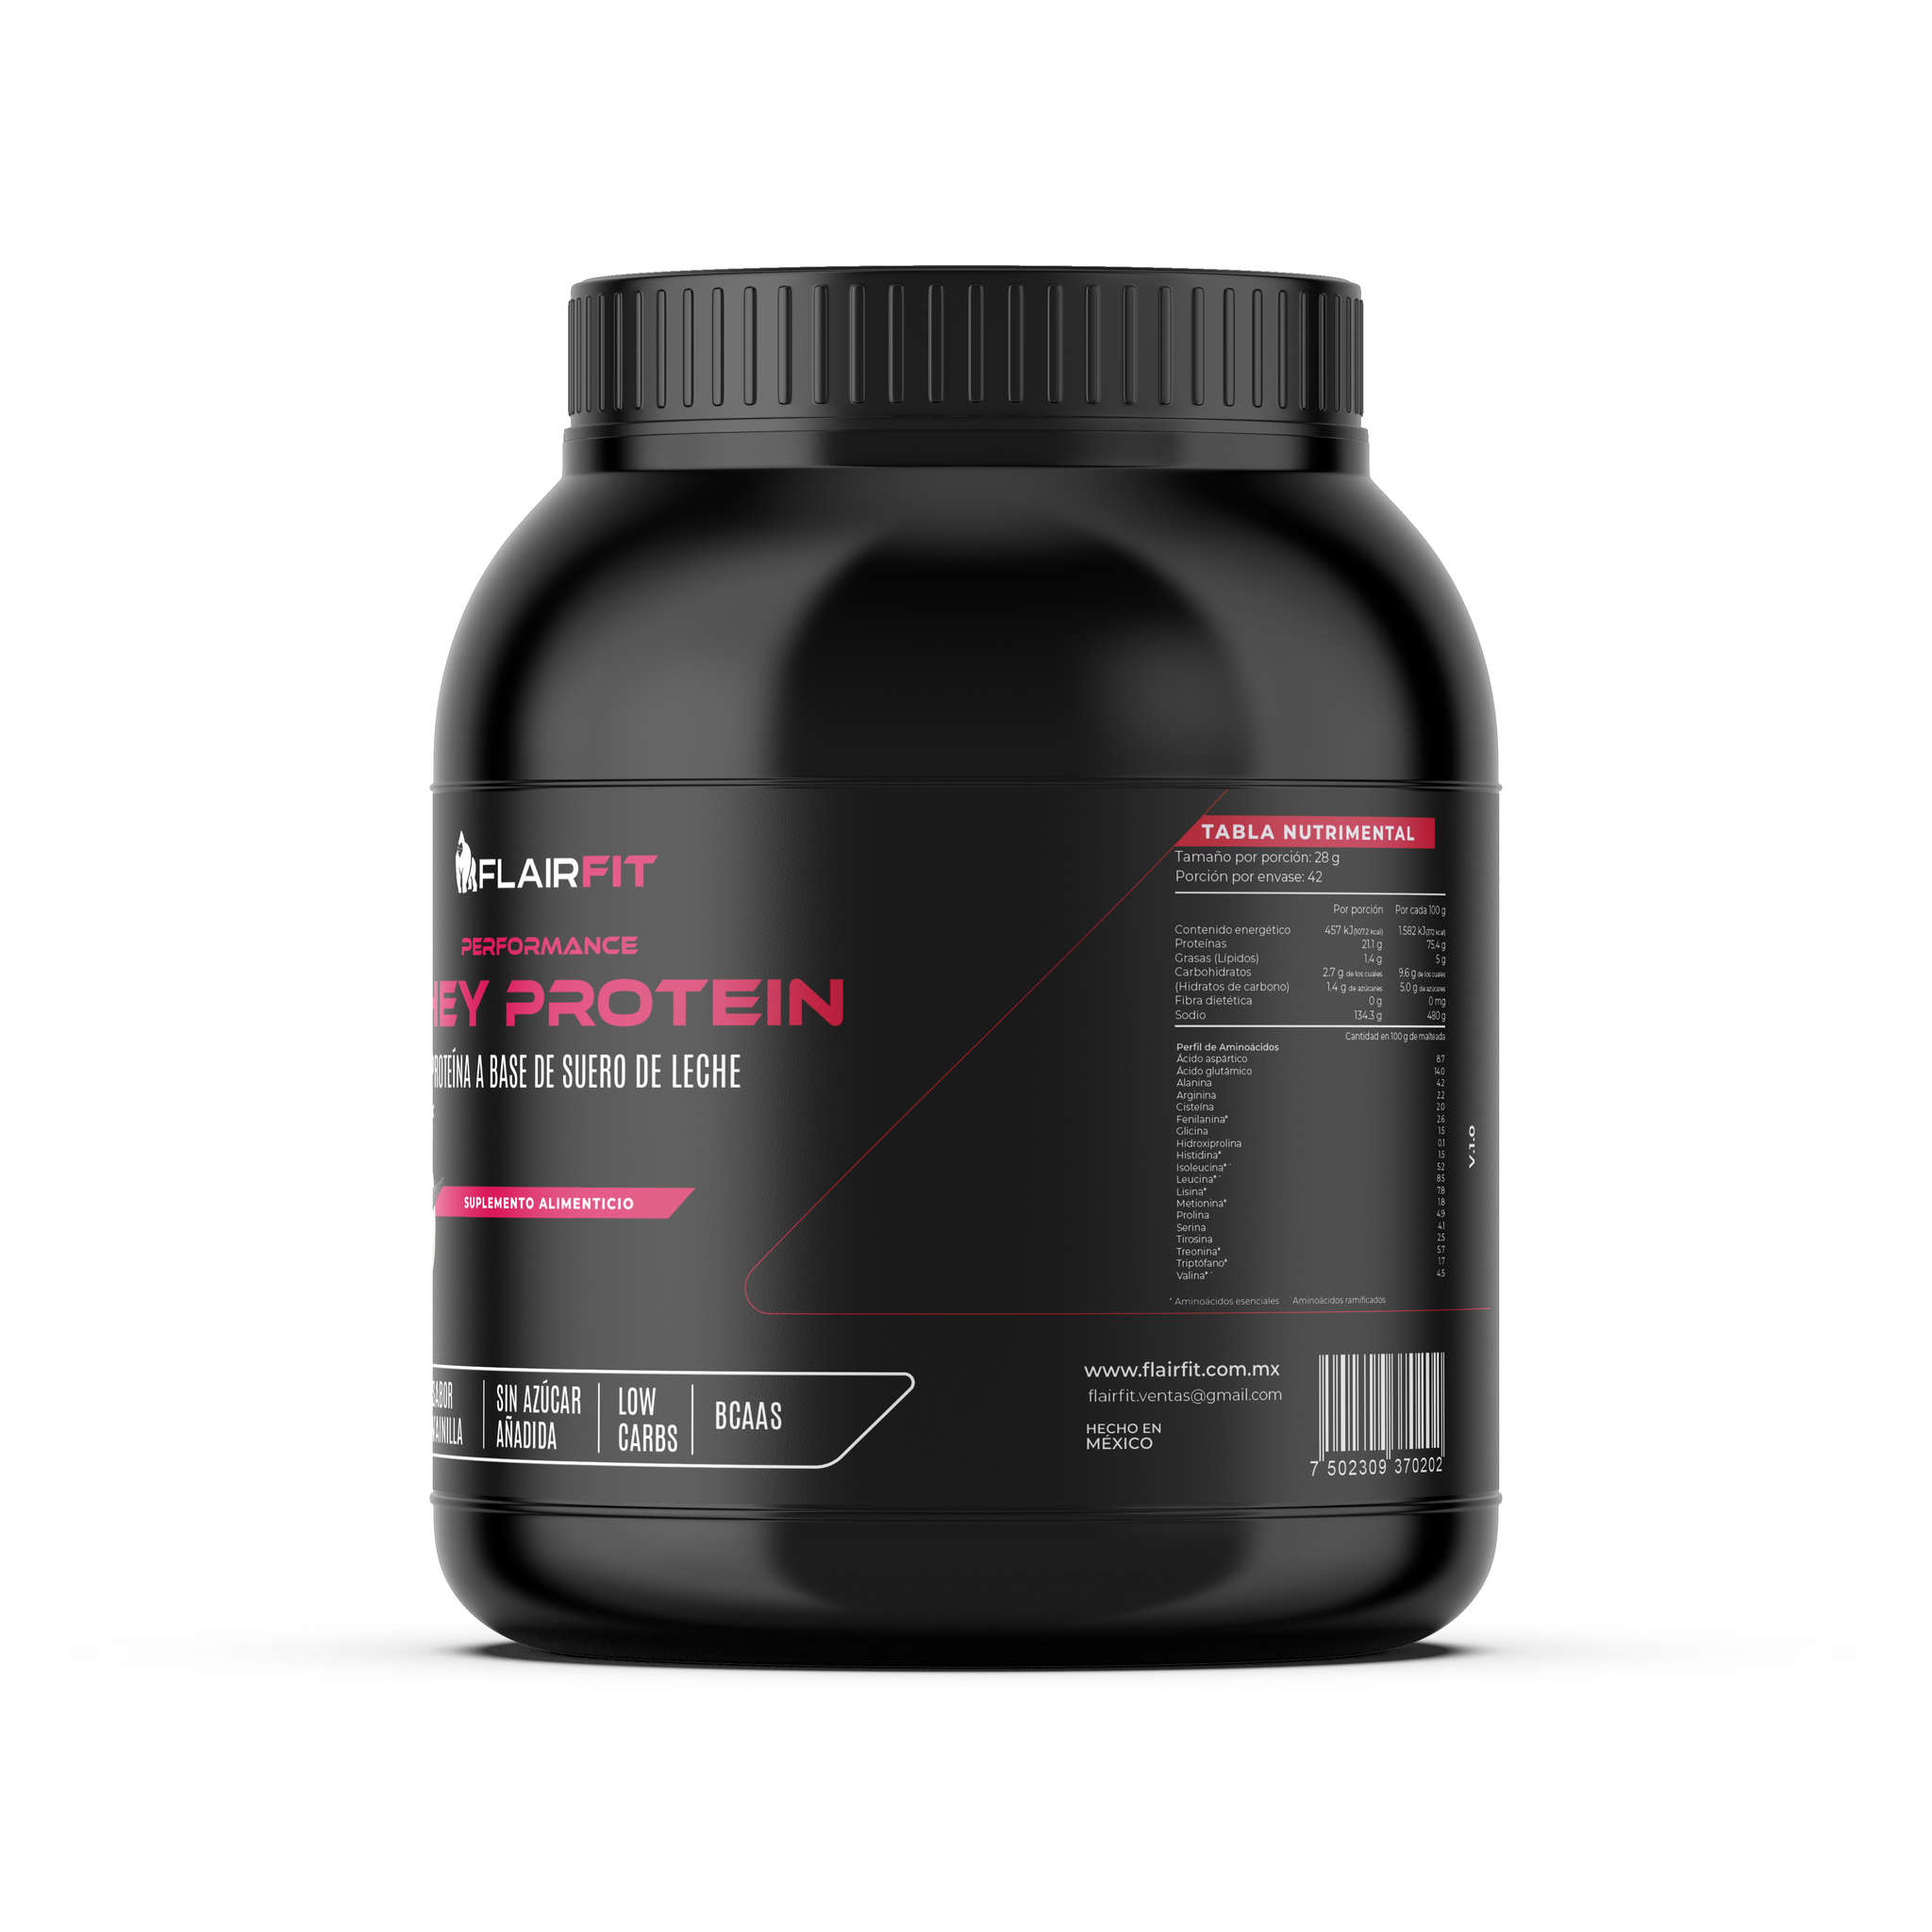 FLAIRFIT® PERFORMANCE WHEY PROTEIN